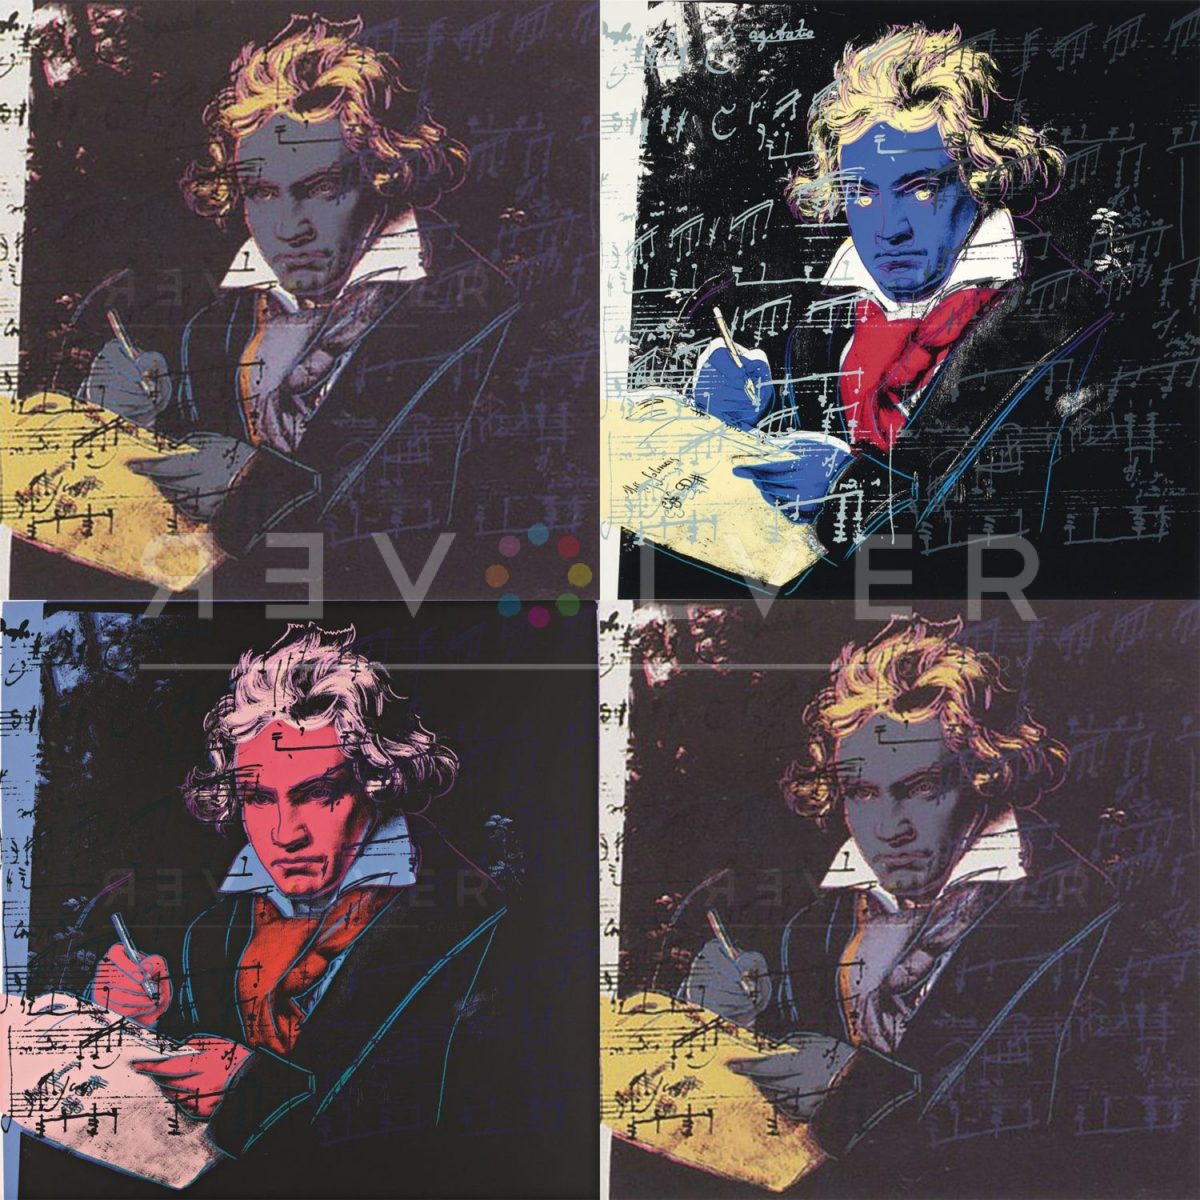 Andy Warhol Beethoven complete portfolio, showing four prints of Beethoven with the Revolver gallery watermark.